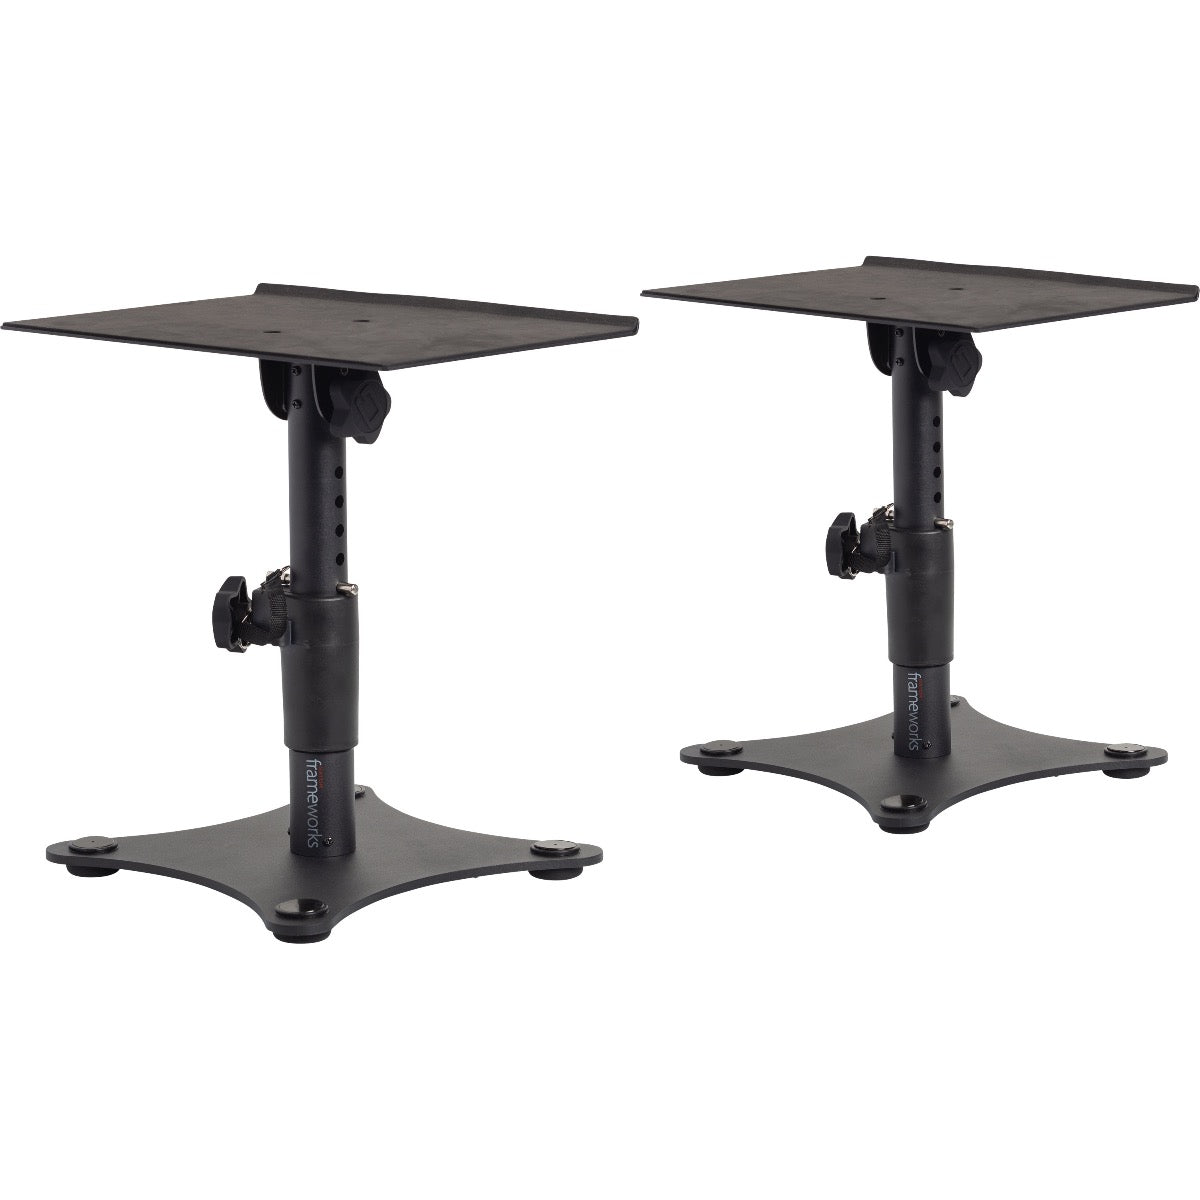 Pair of Gator Frameworks GFWSPKSTMNDSK Desktop Studio Monitor Stands extended to full height with top surfaces flat